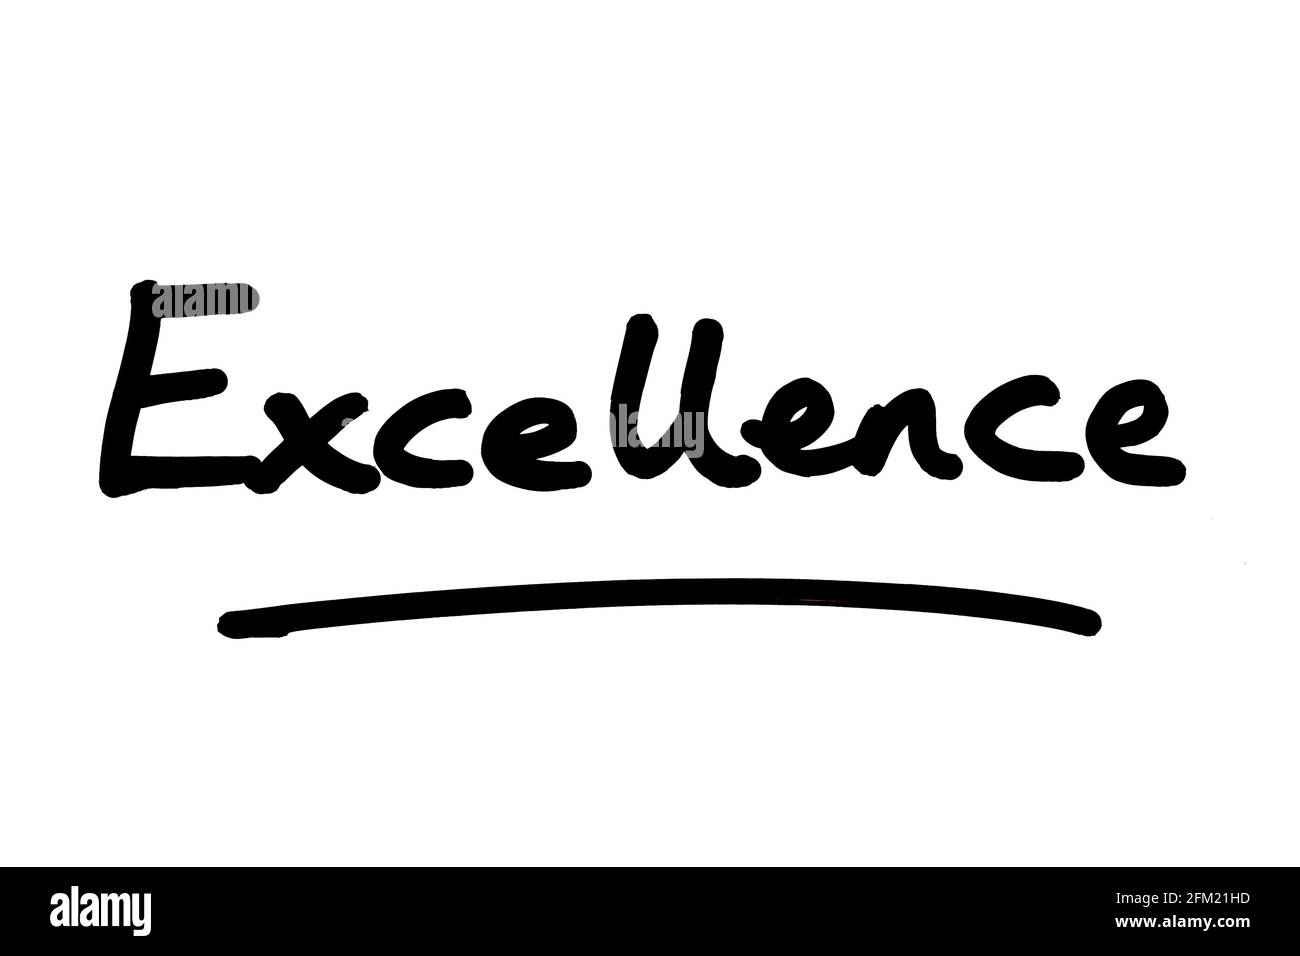 Excellence, handwritten on a white background. Stock Photo